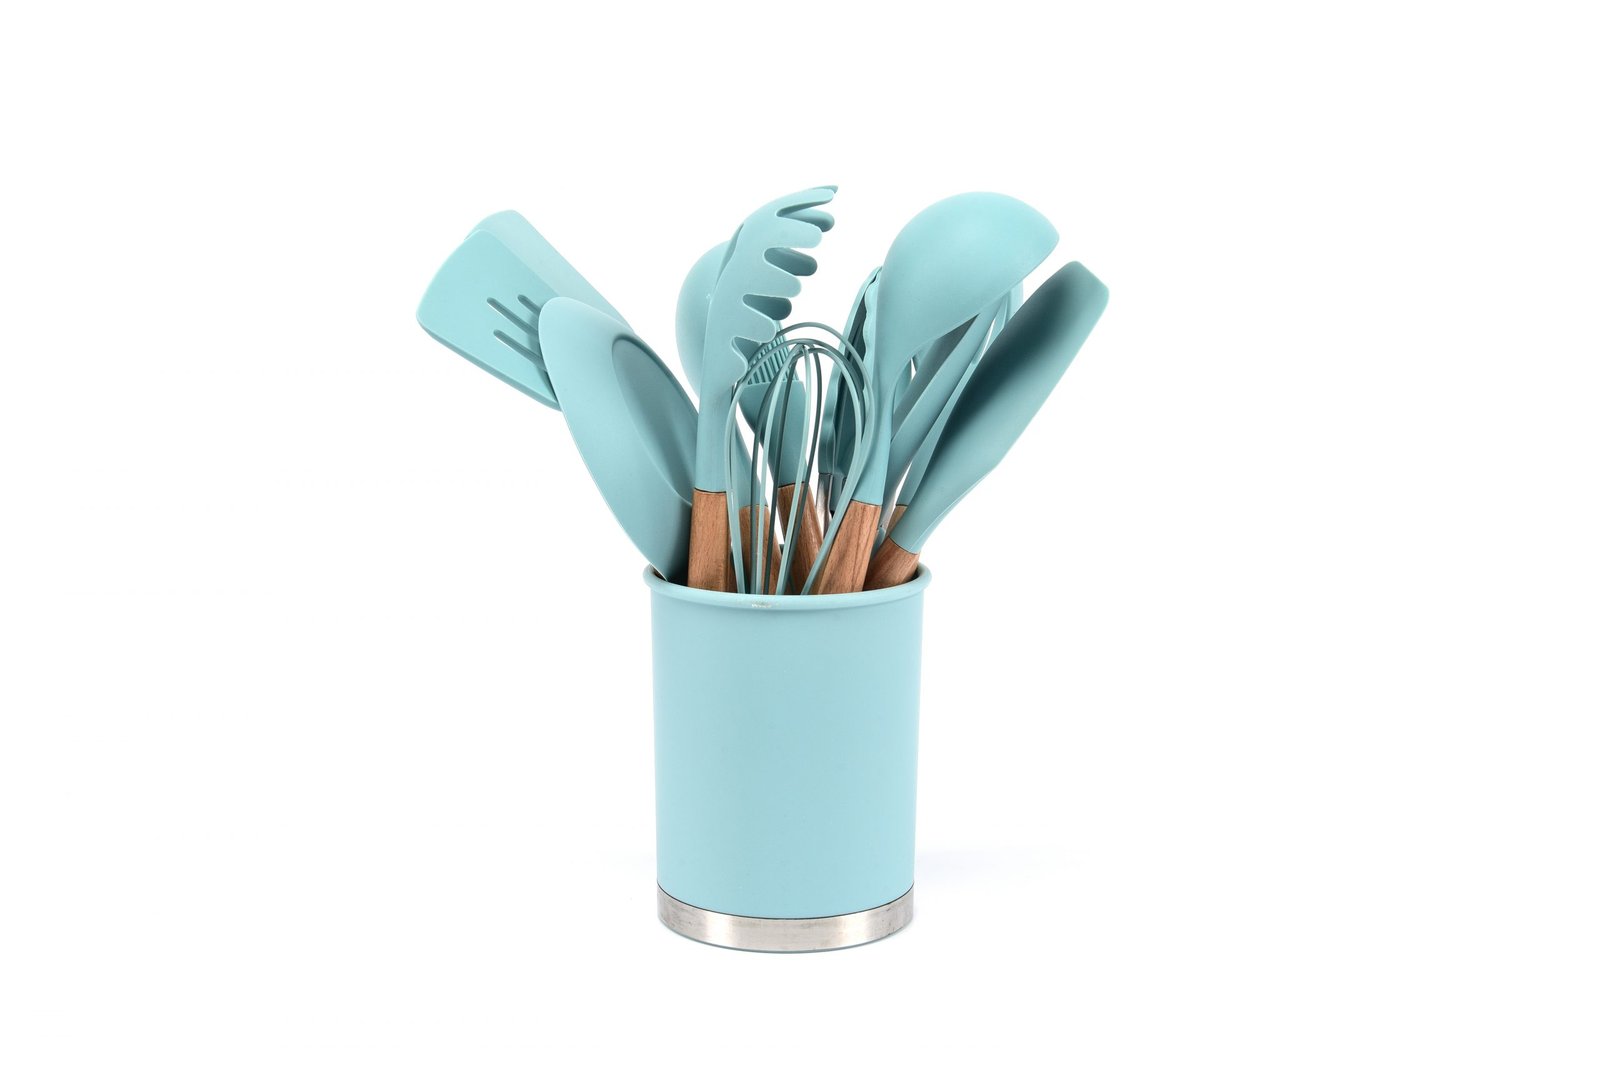 Wholesale The manufacturer directly sells high-temperature resistant kitchen  accessories cooking utensils cute From m.